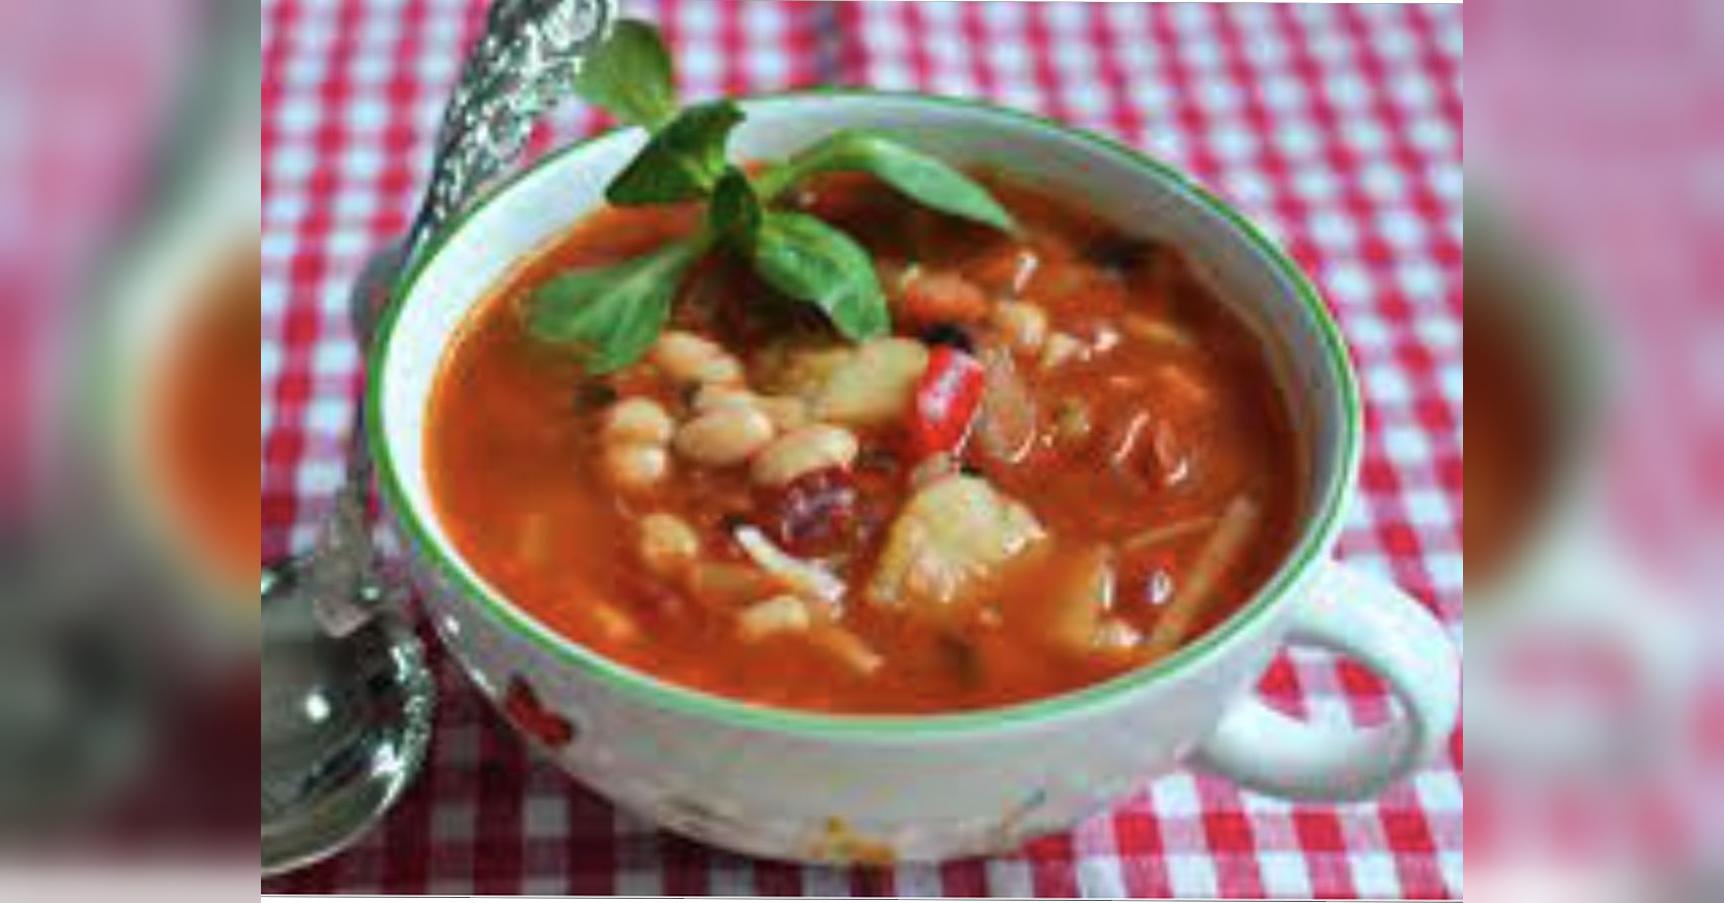 “Fat and thin”: a recipe for vegetable soup from Alla Pugacheva